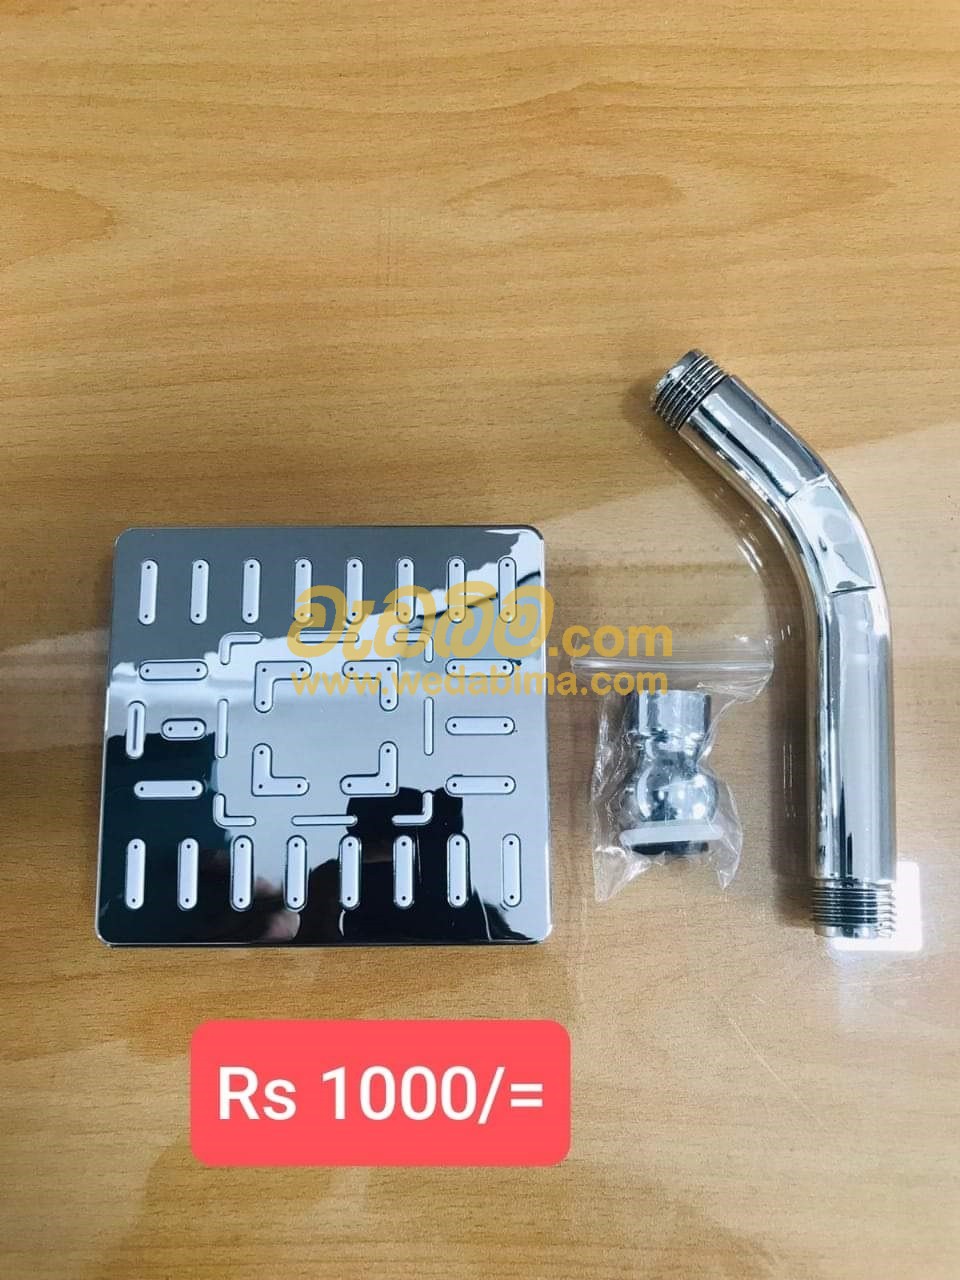 Jet Shower for sale price colombo